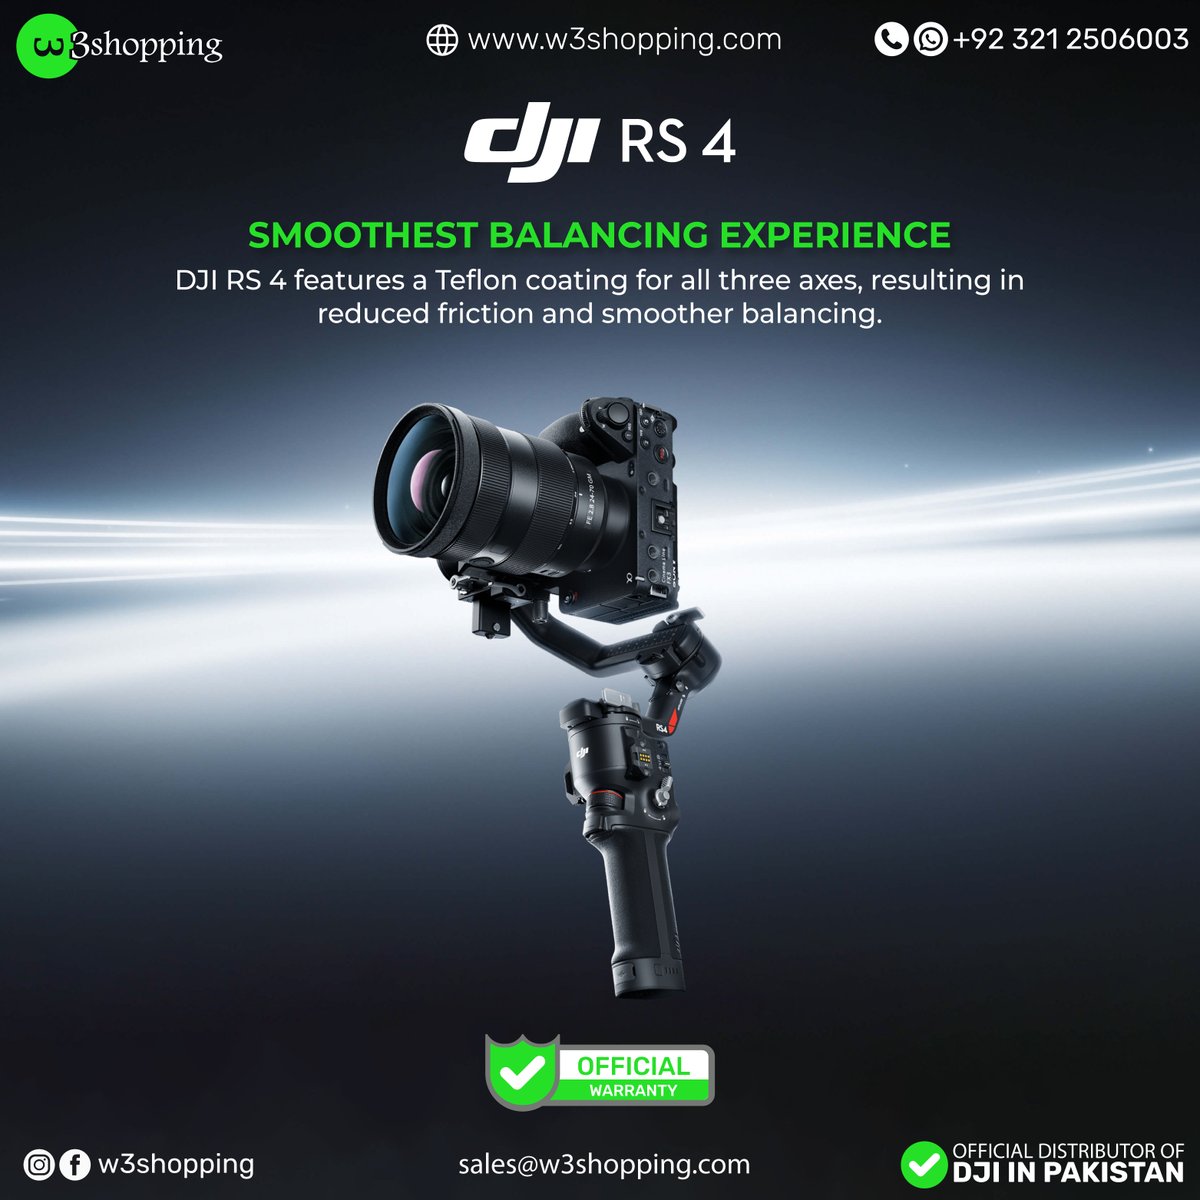 Experience the next level of stability with the DJI RS 4! 🚀Achieve the smoothest balancing experience with its Teflon™ coating on all three axes.✨

#DJI #W3Shopping #DJIRS4 #DJIRS4Pro #Filmmaking #Innovation #VideoProduction #CreativeCapture #SmoothShots #ContentCreation